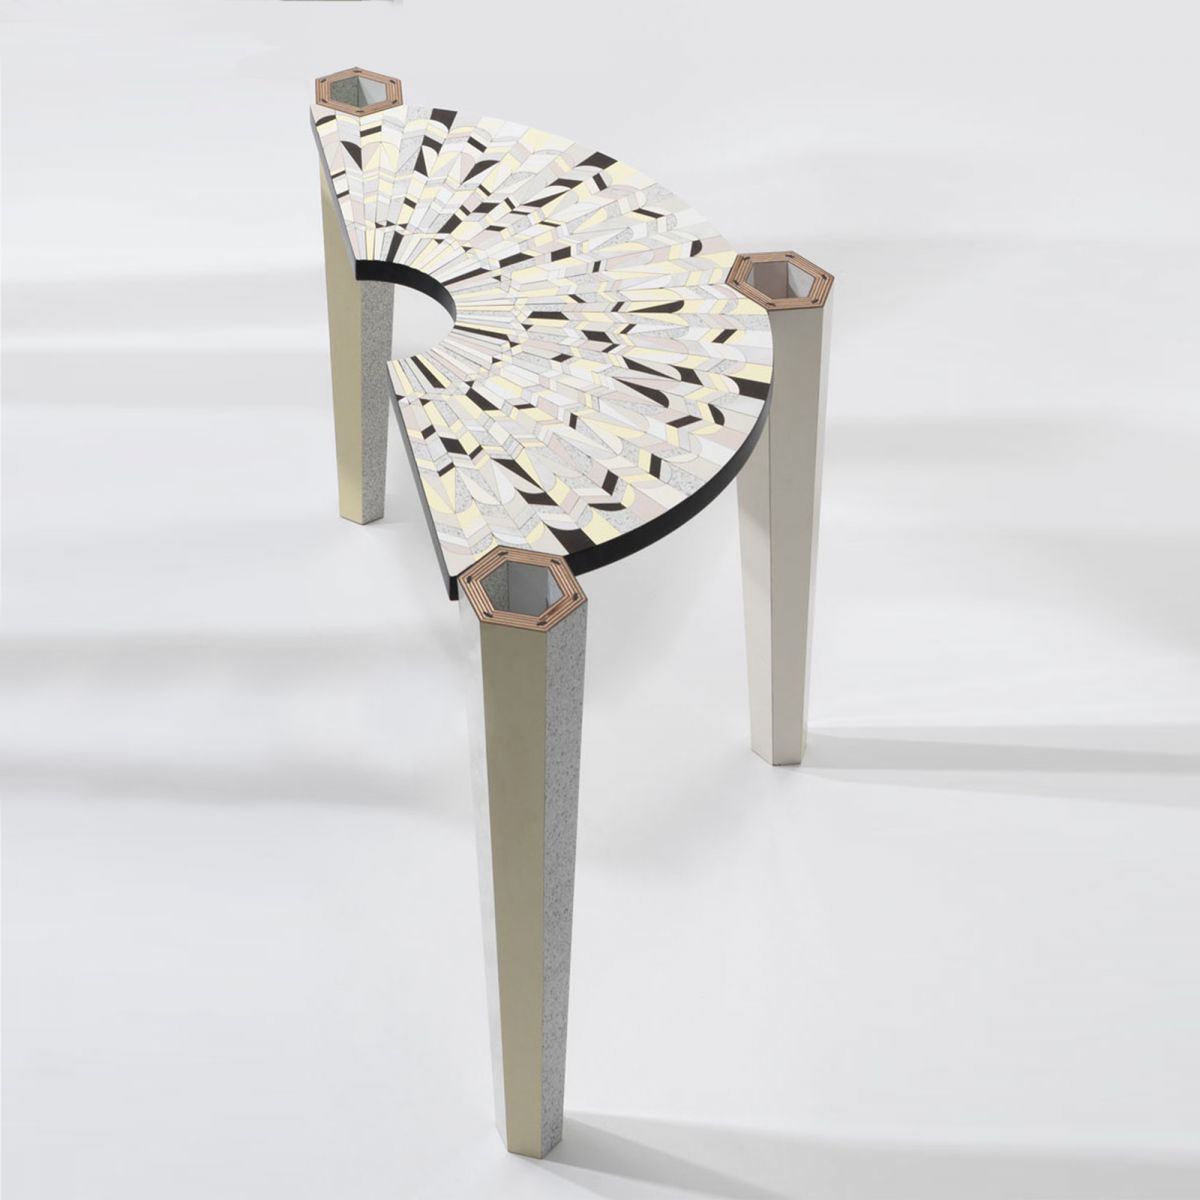 'Playtime' low table - Deco pattern Bethan Laura Wood pic-1